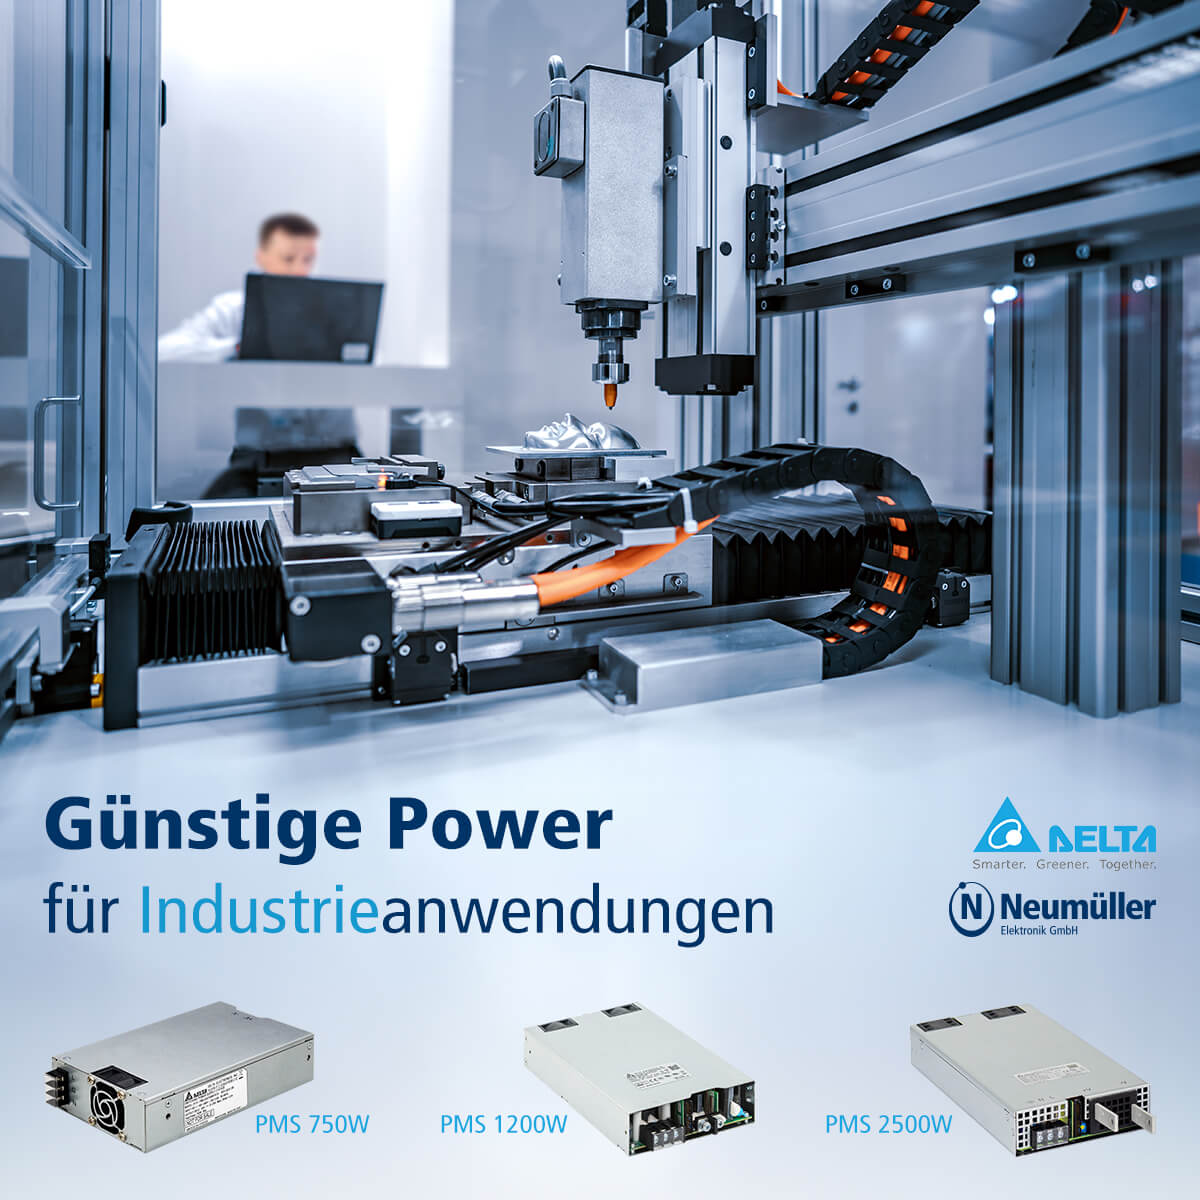 Affordable power for industrial applications